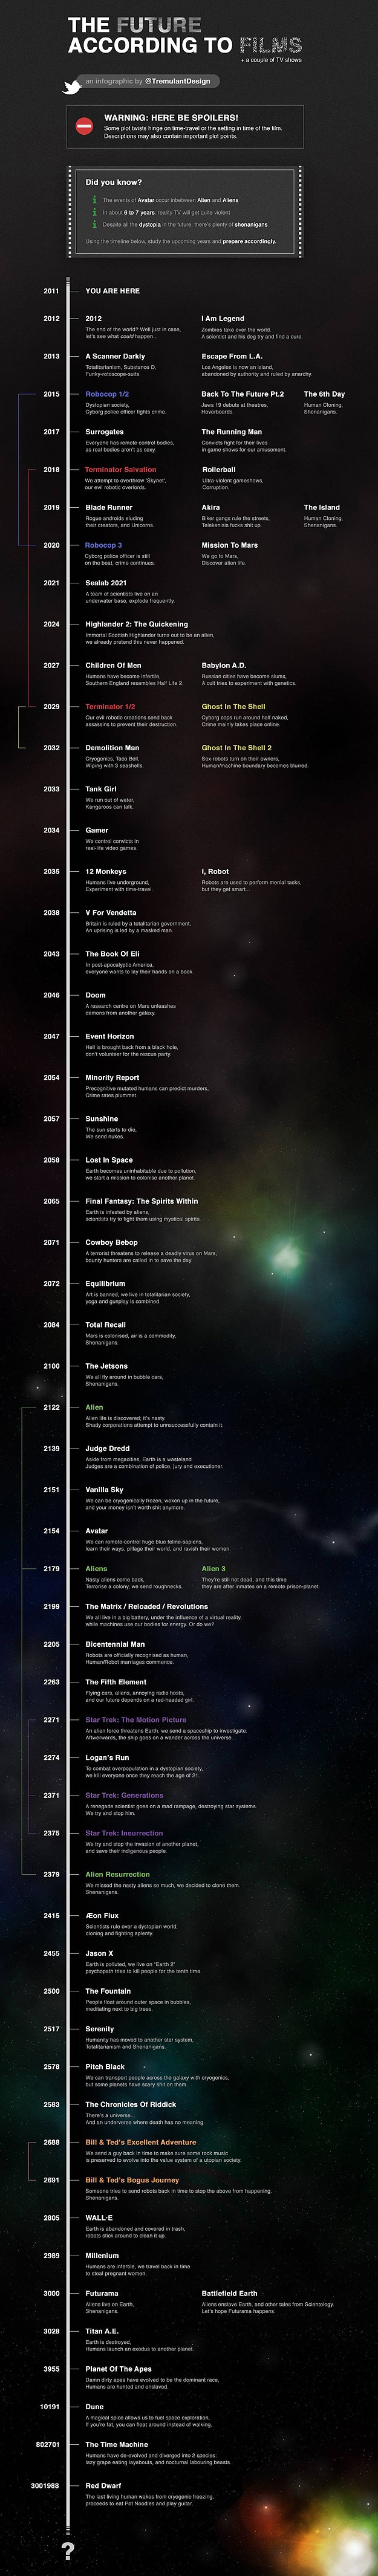 The Future According To Science Fiction Films [Infographic]